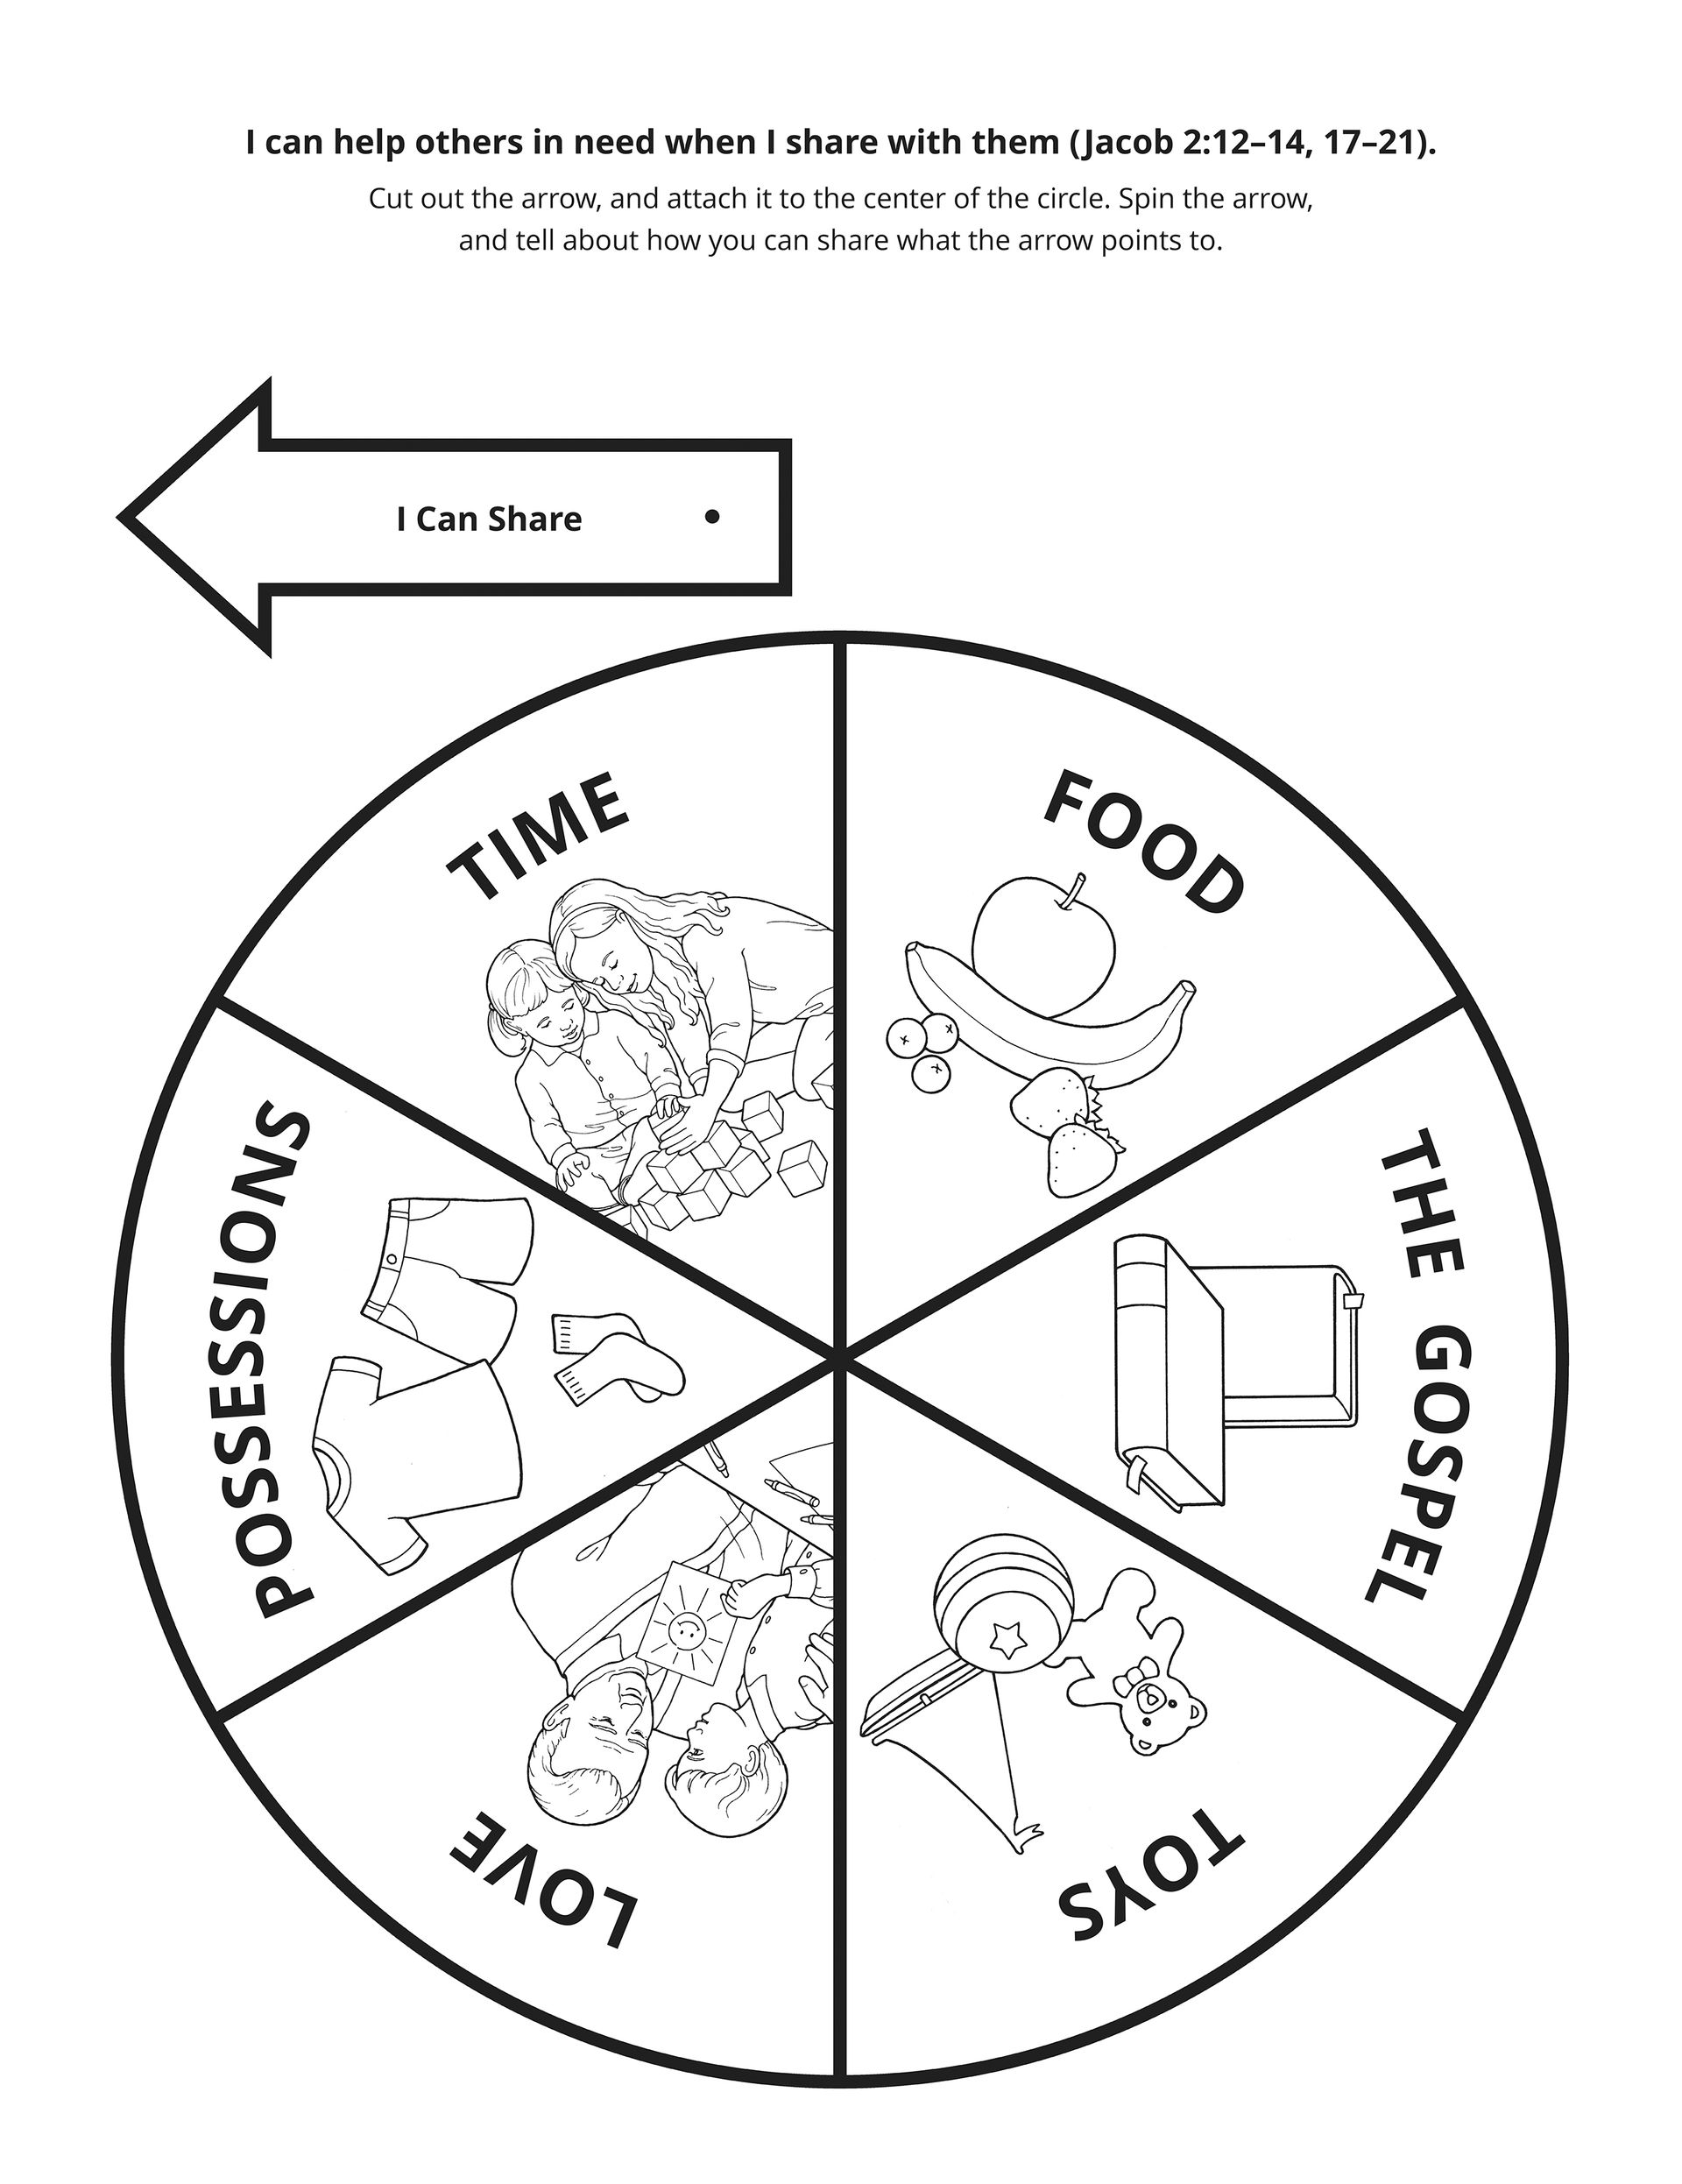 A line-art spinning wheel activity that teaches about sharing.